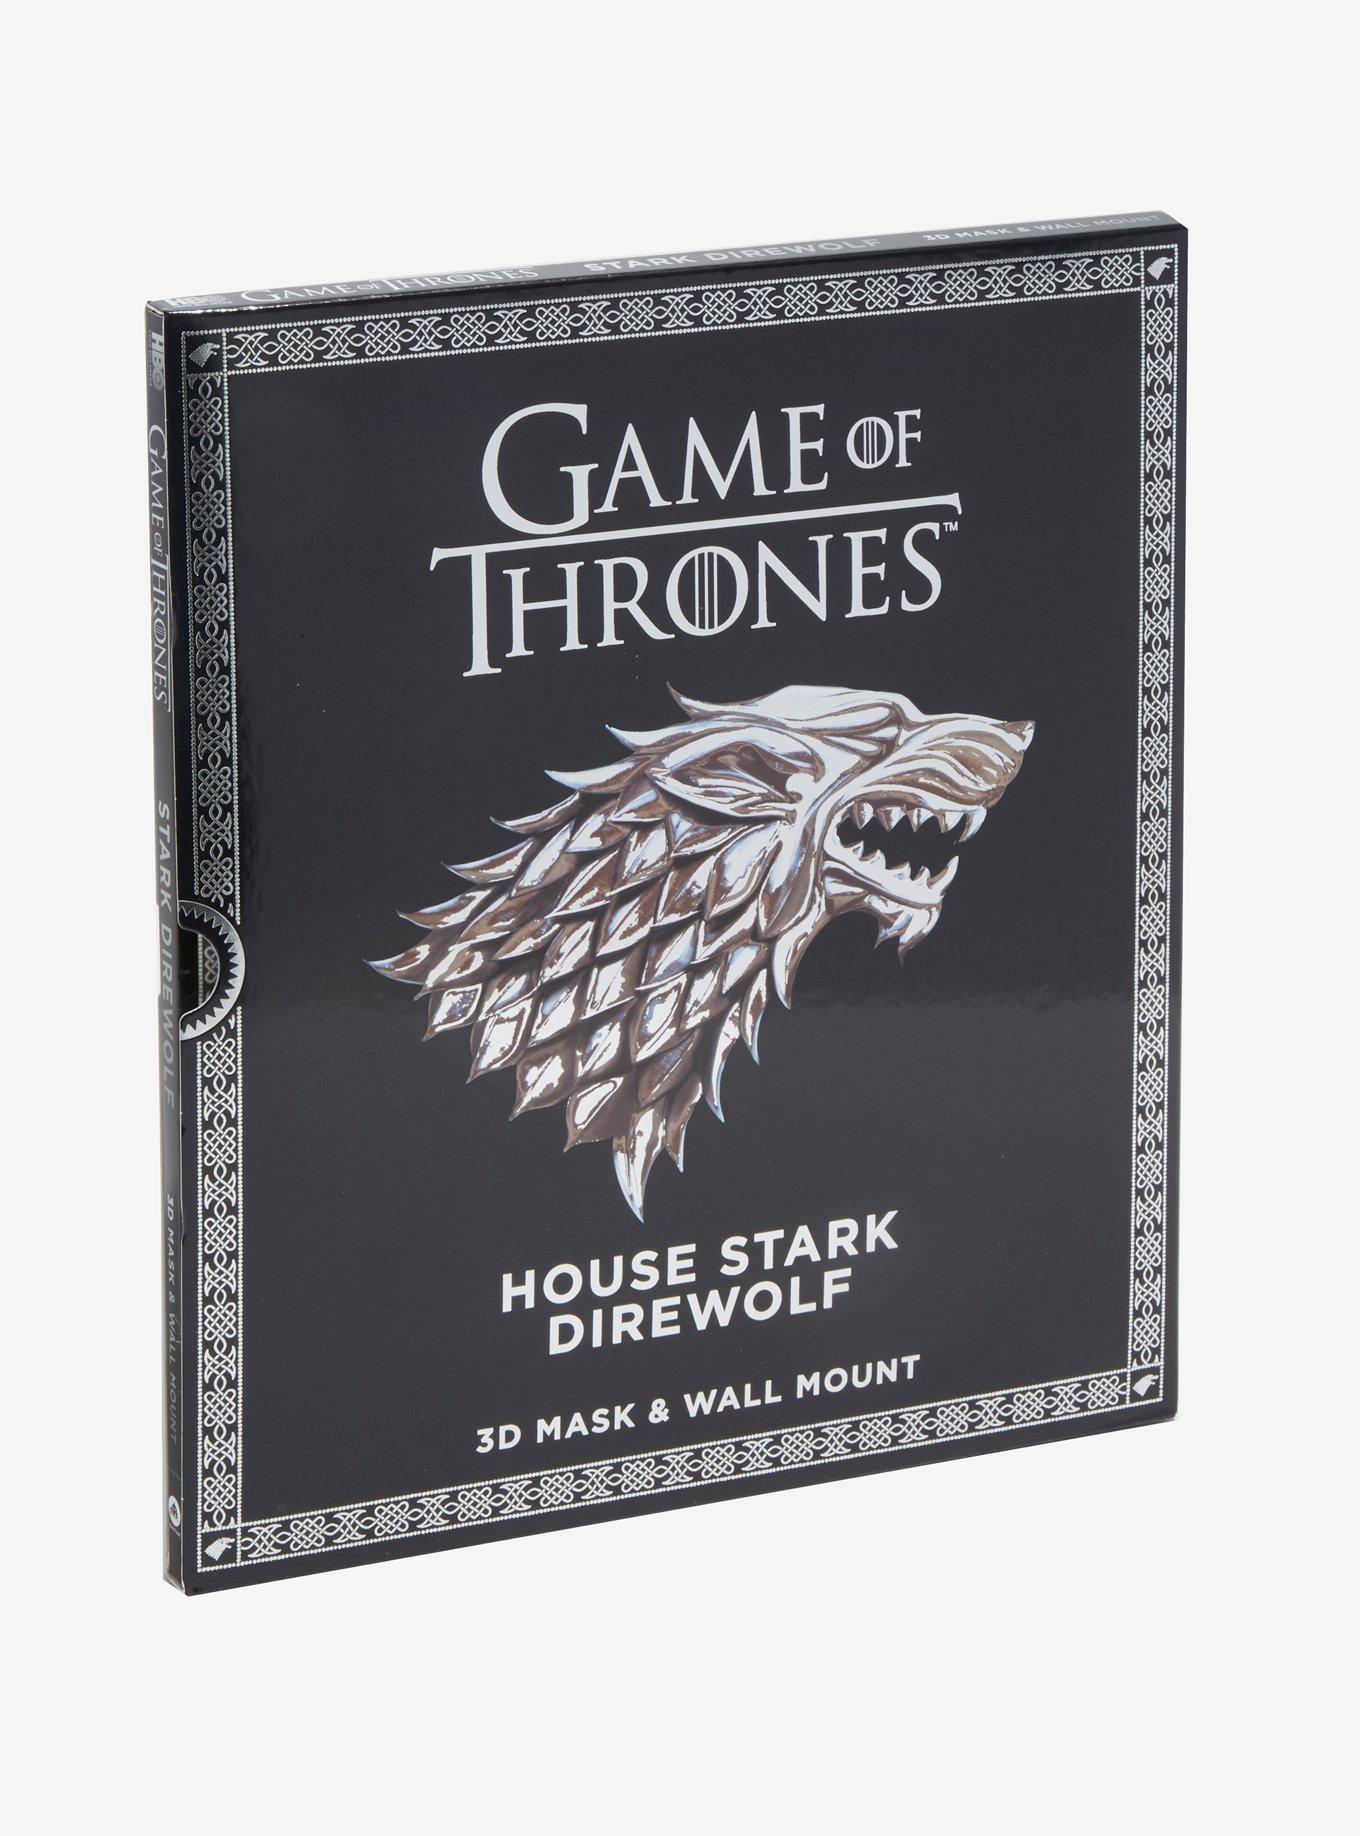 Game Of Thrones House Stark Direwolf 3D Mask & Wall Mount Book, , hi-res